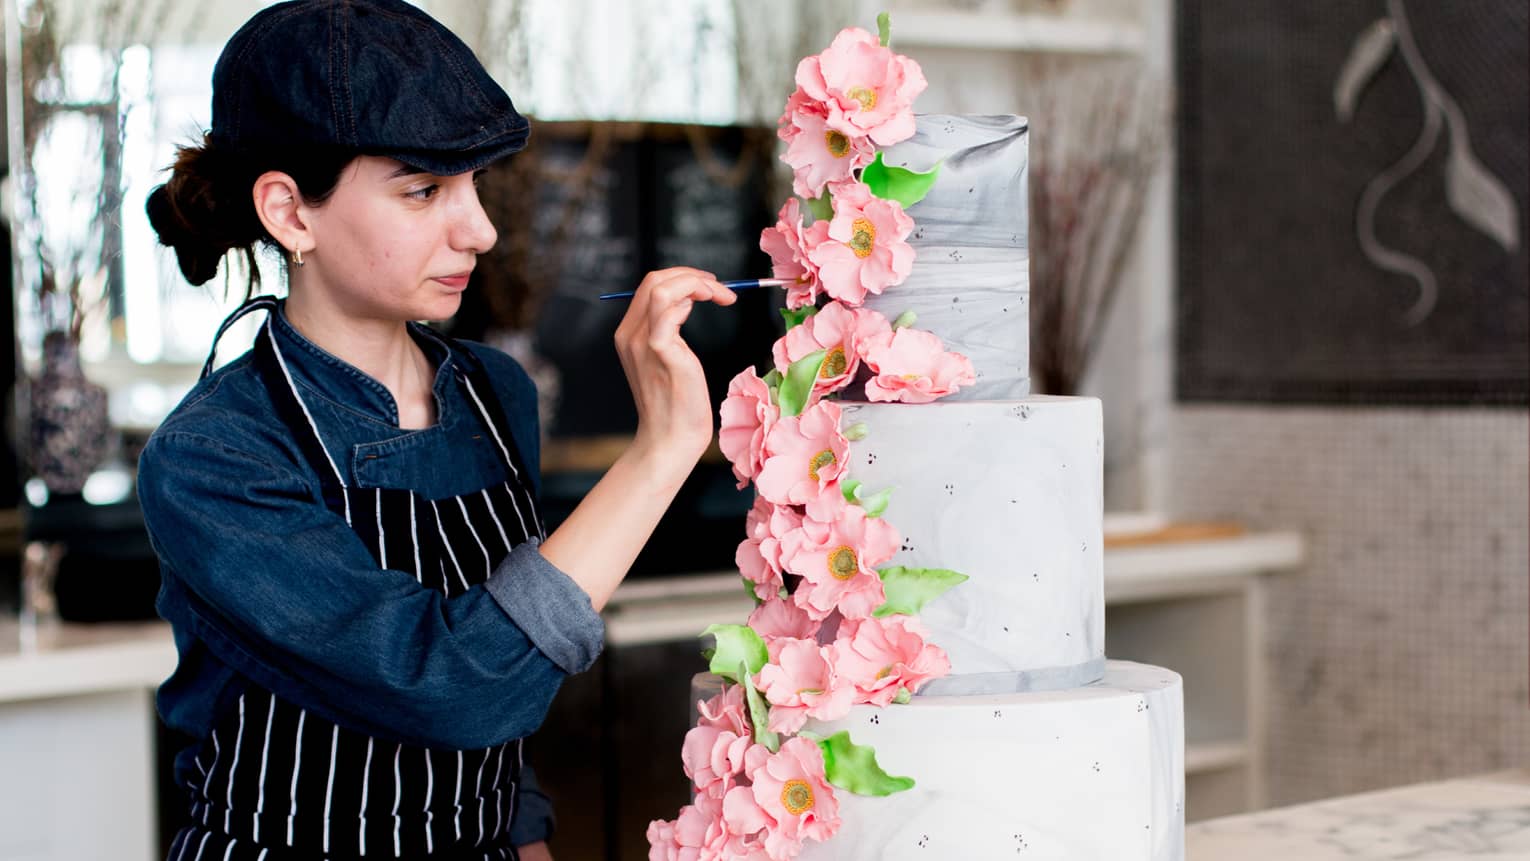 Chef places large pink flowers on three tiered wedding cake